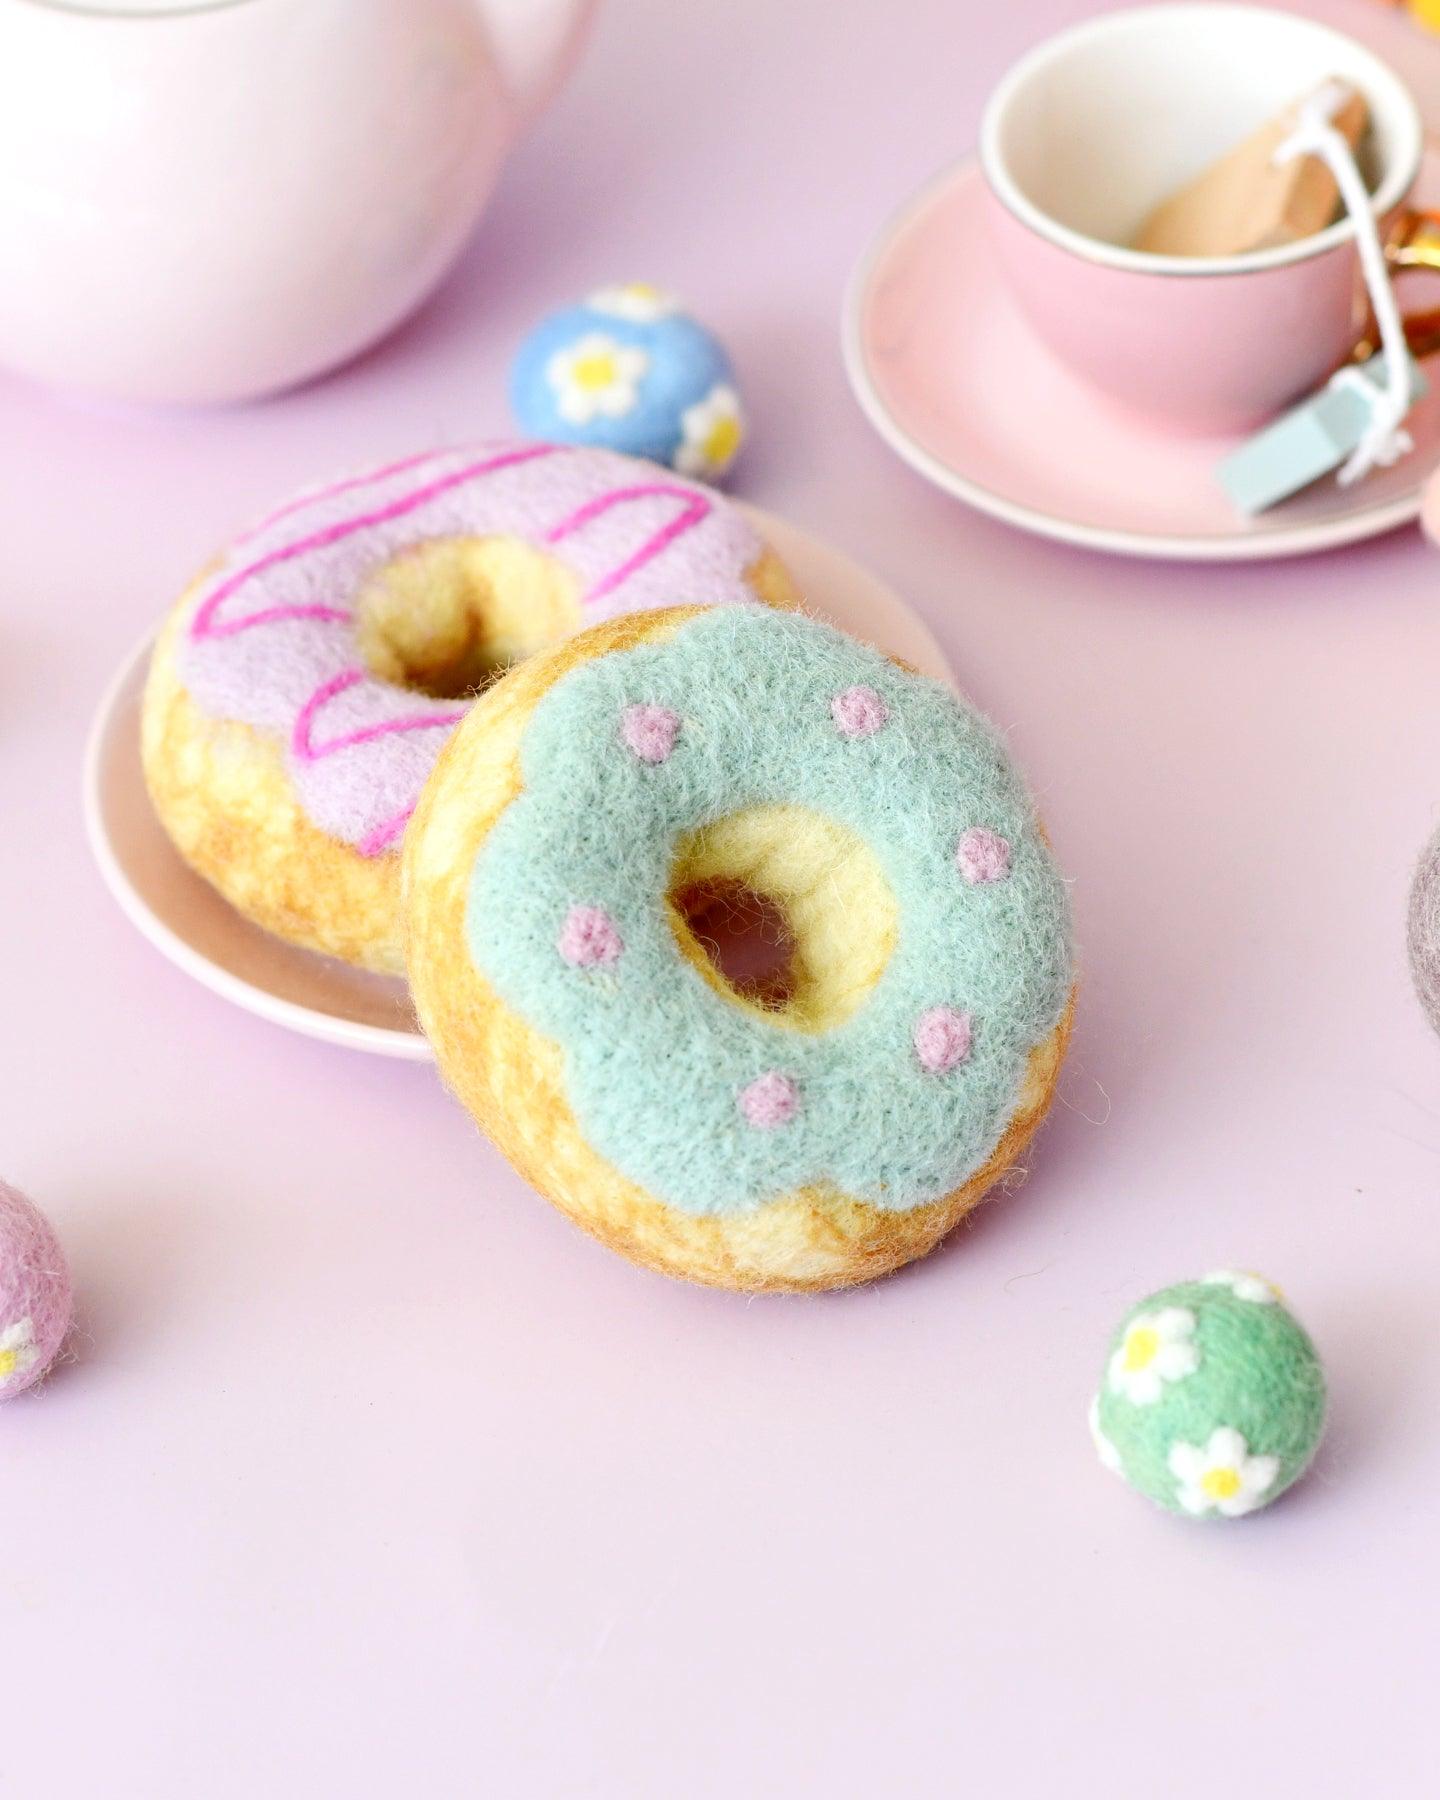 Felt Doughnut (Donut) with Pastel Blue Frosting and Pink Dots - Tara Treasures